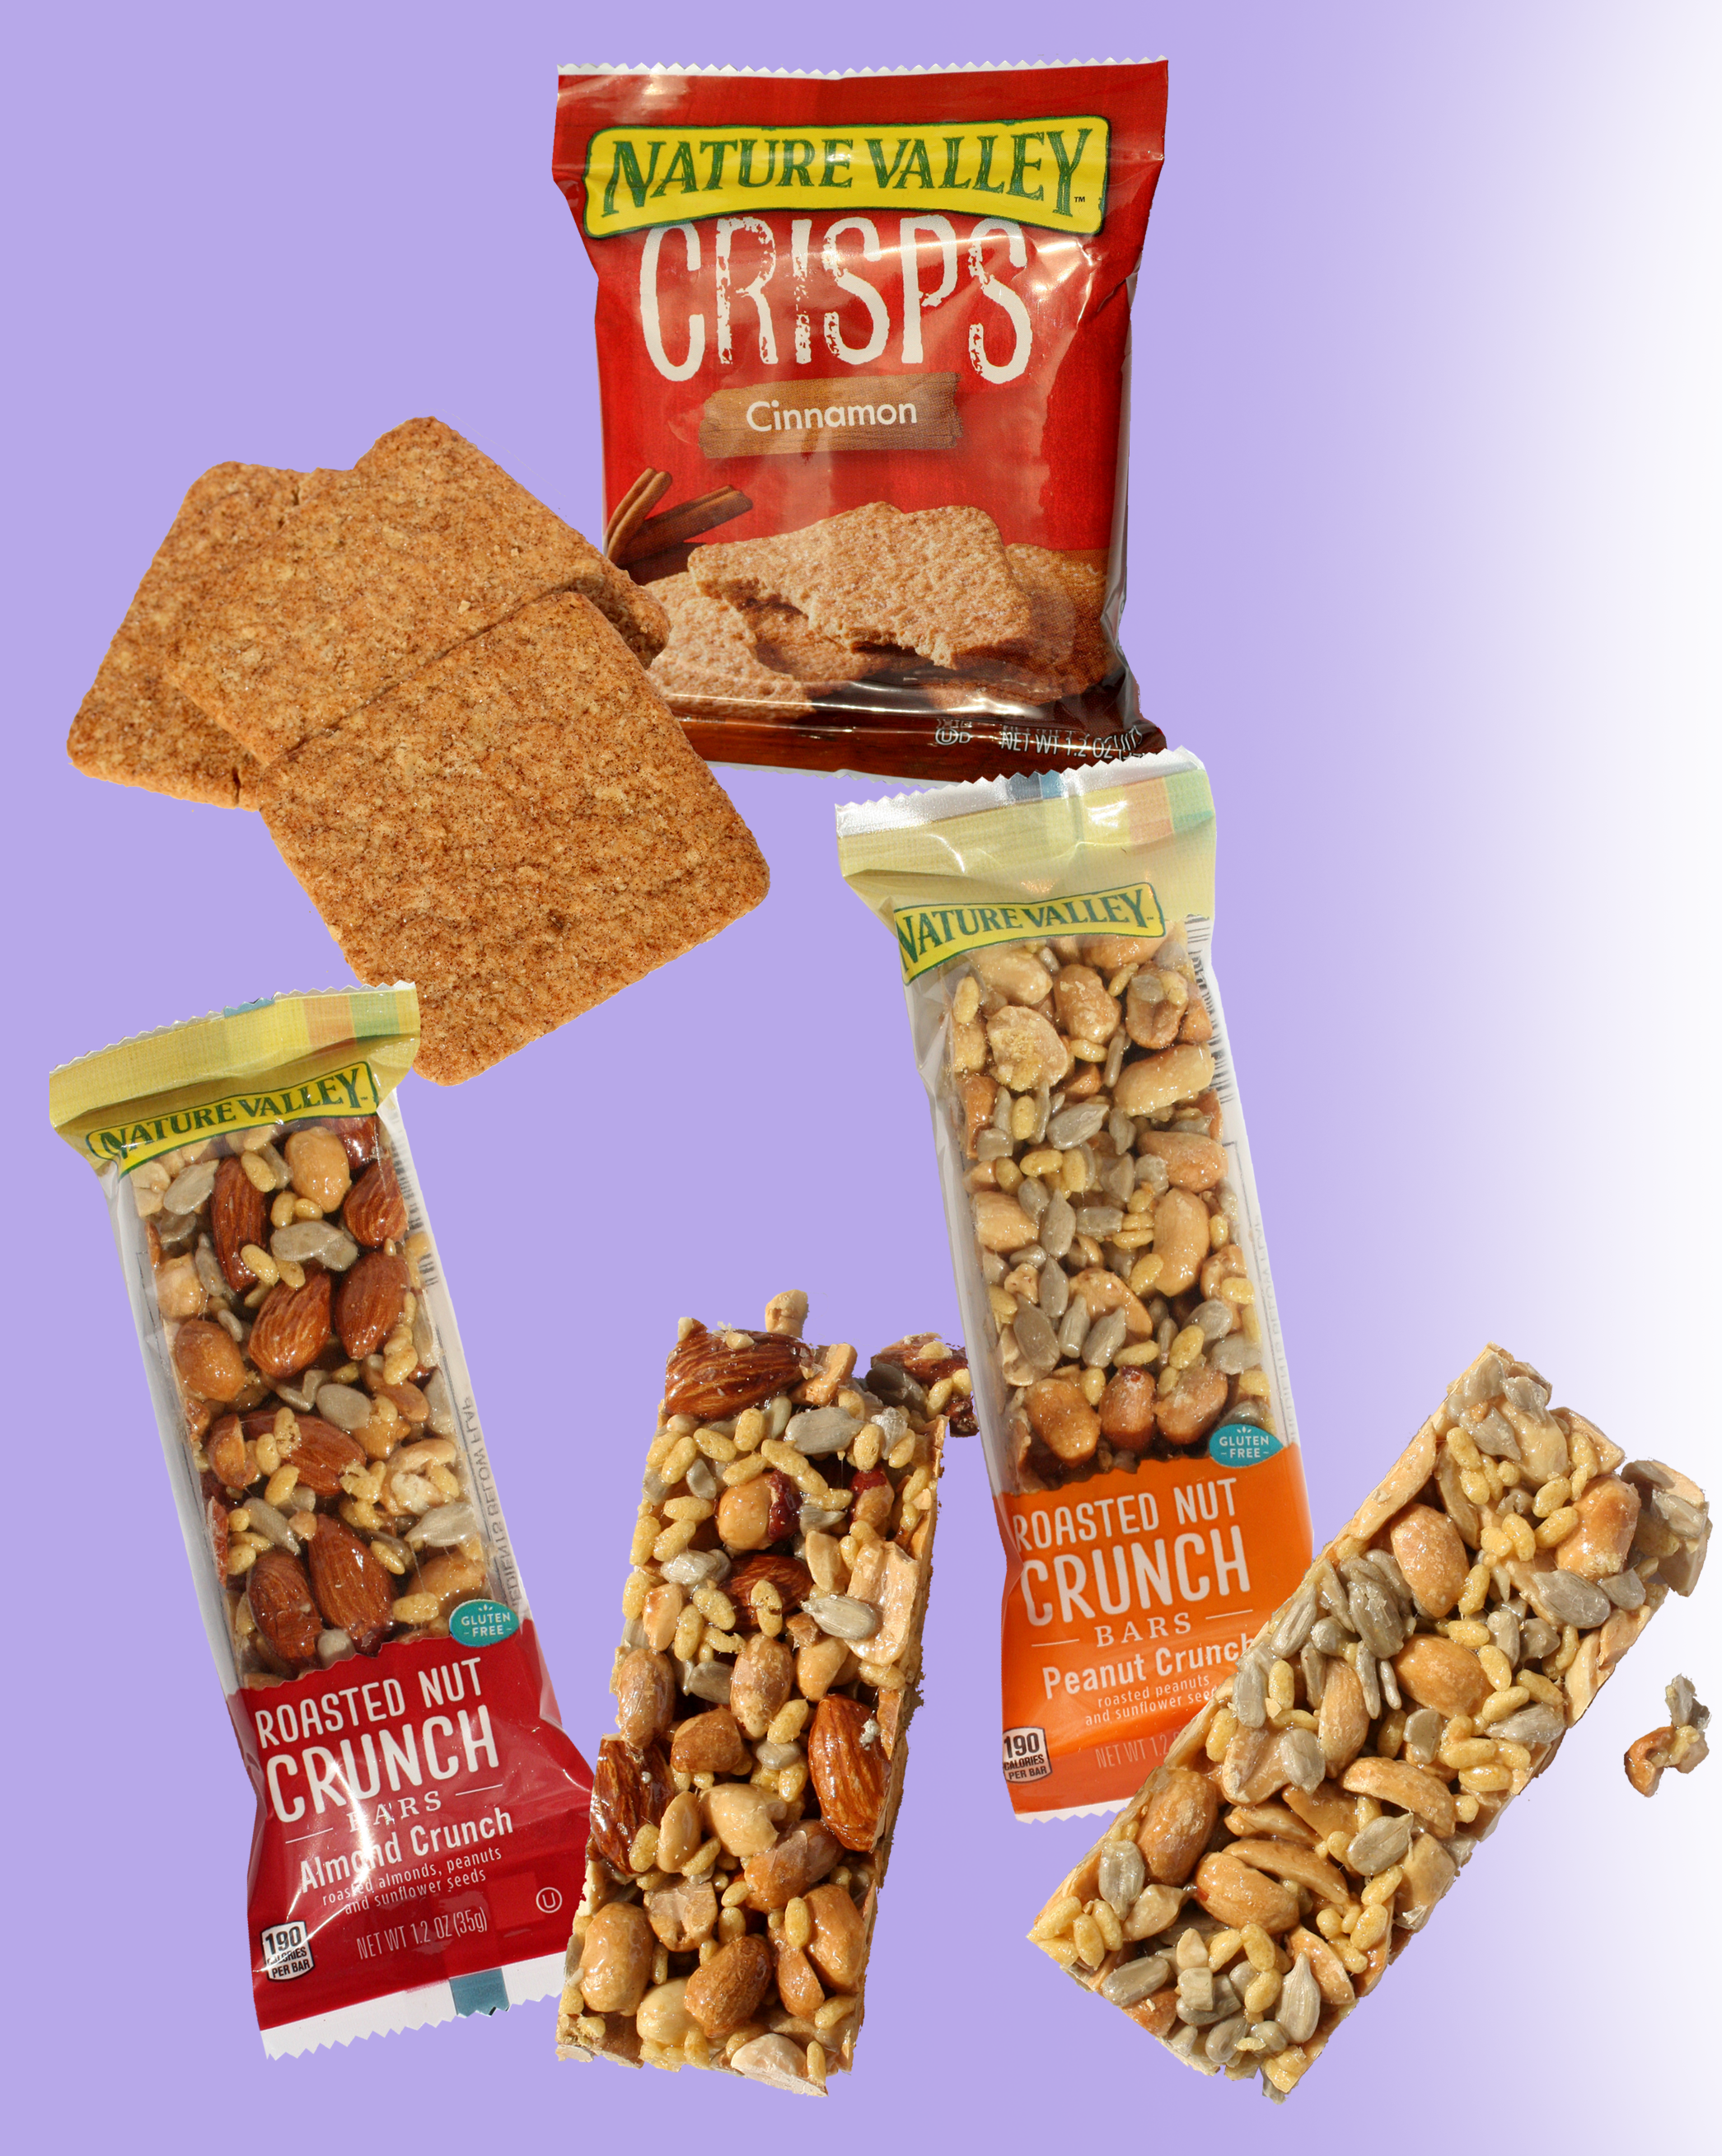 new Granola products